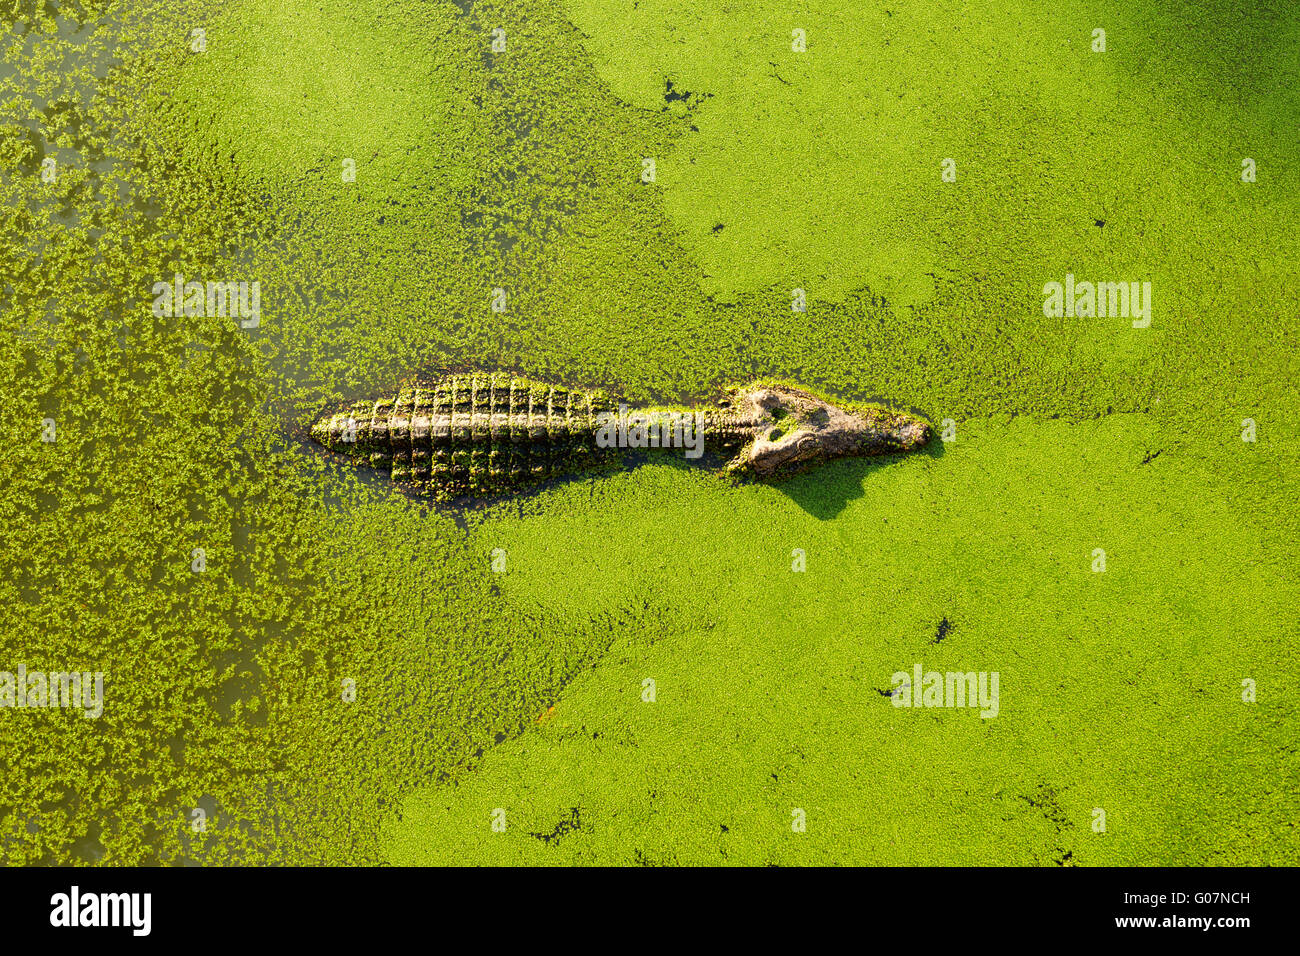 alligator in wetland pond covered with duckweed and swimming Stock Photo